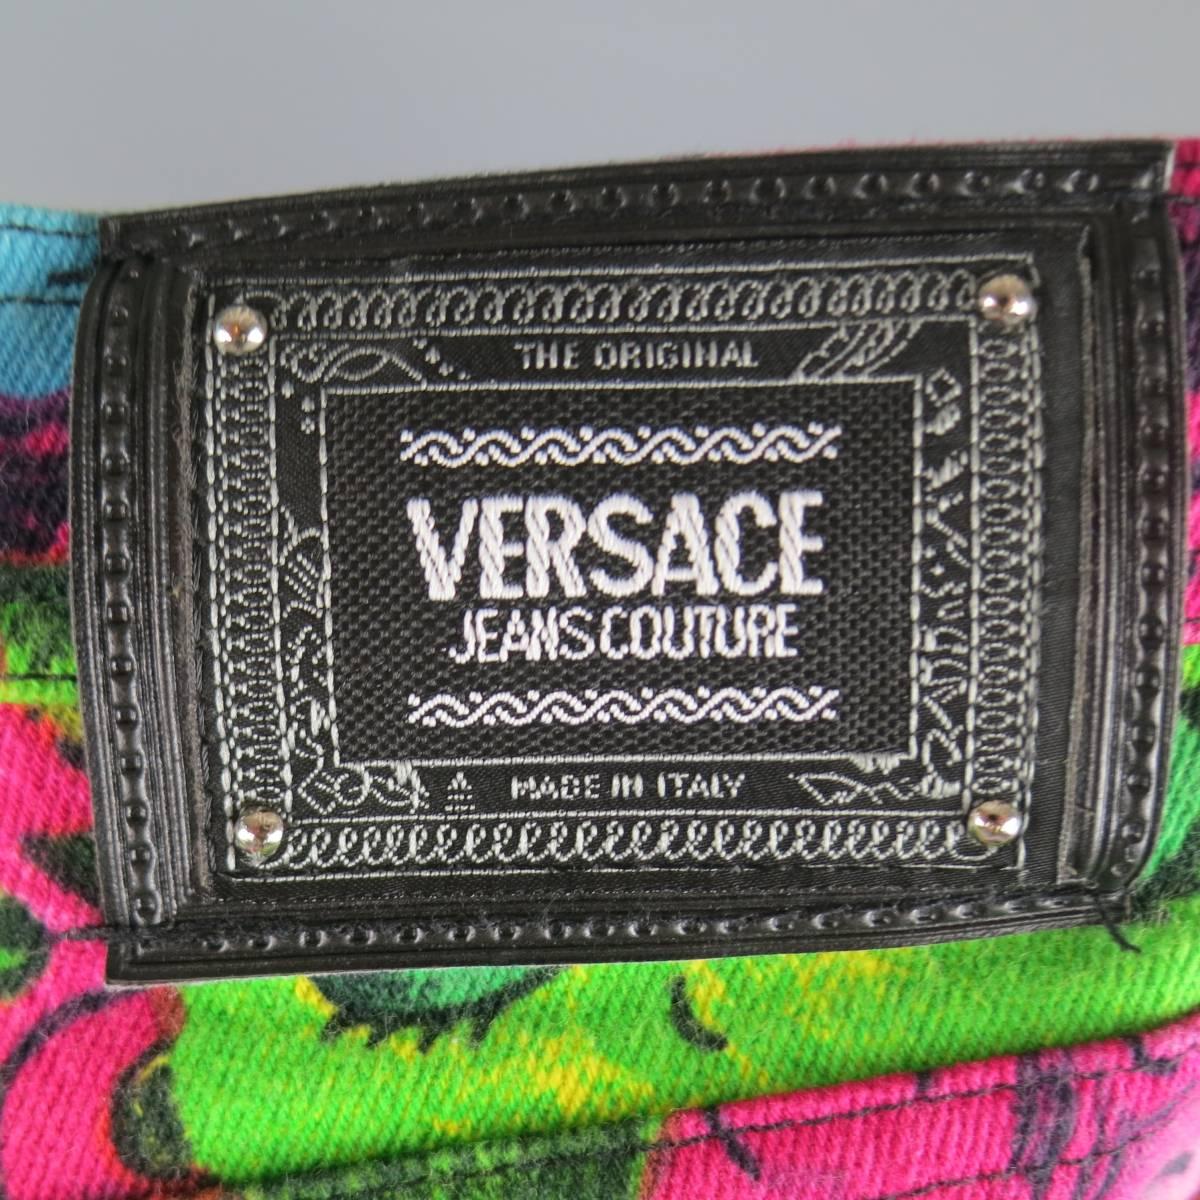 GIANNI VERSACE Jeans COUTURE 6 Multi-Color Marilyn Monroe and Betty Boop Jeans 1